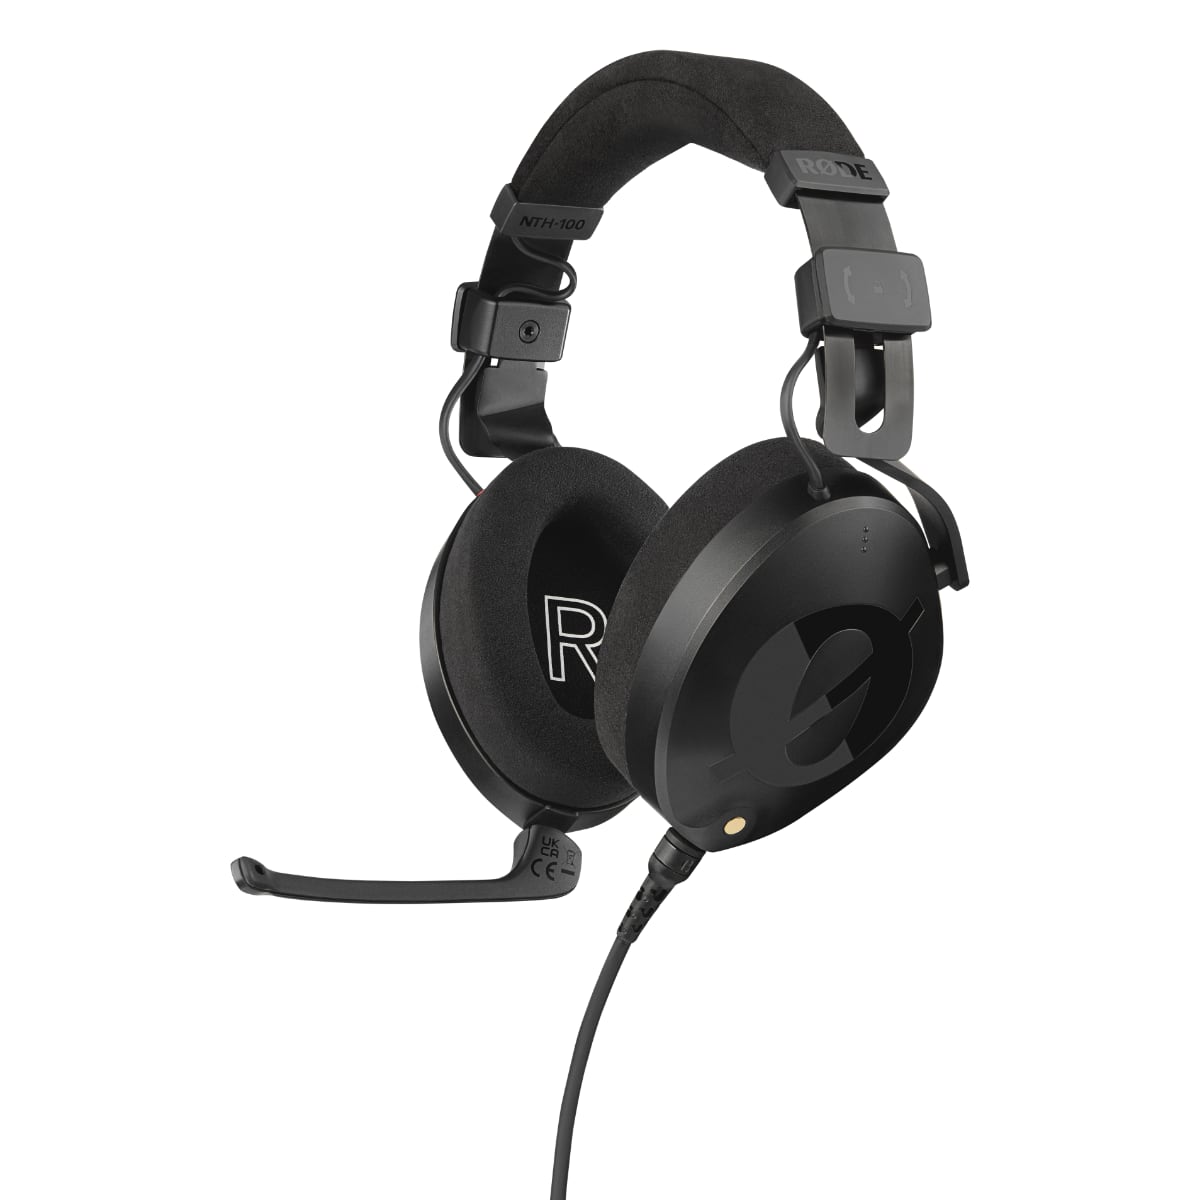 Rode NT100M Professional Over-Ear Headphones featuring a broadcast-grade microphone